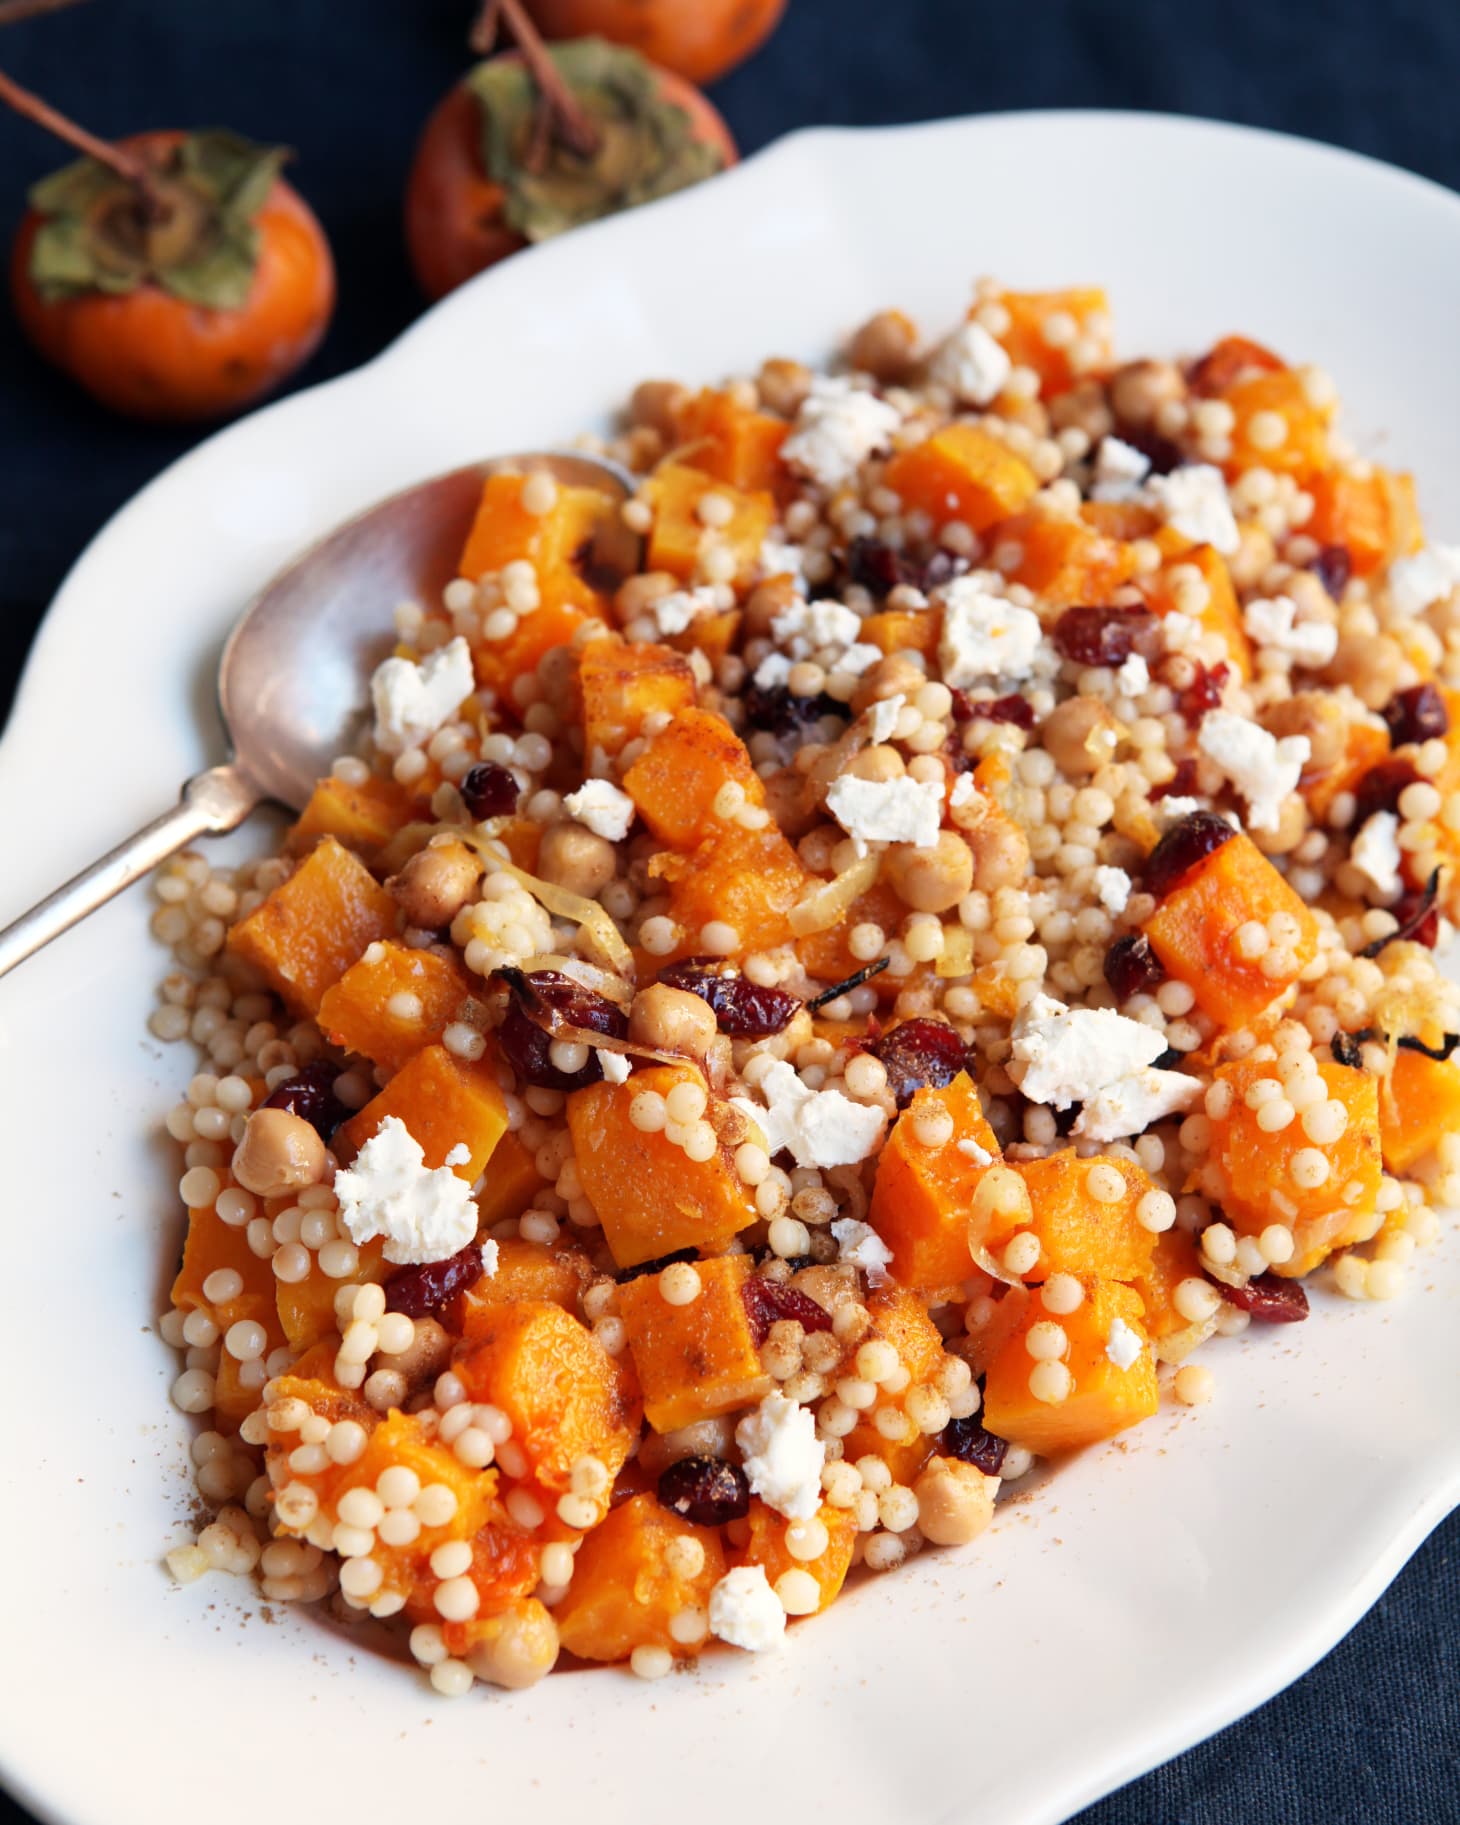 10 Flavorful Couscous Recipes to Make for Dinner | Kitchn